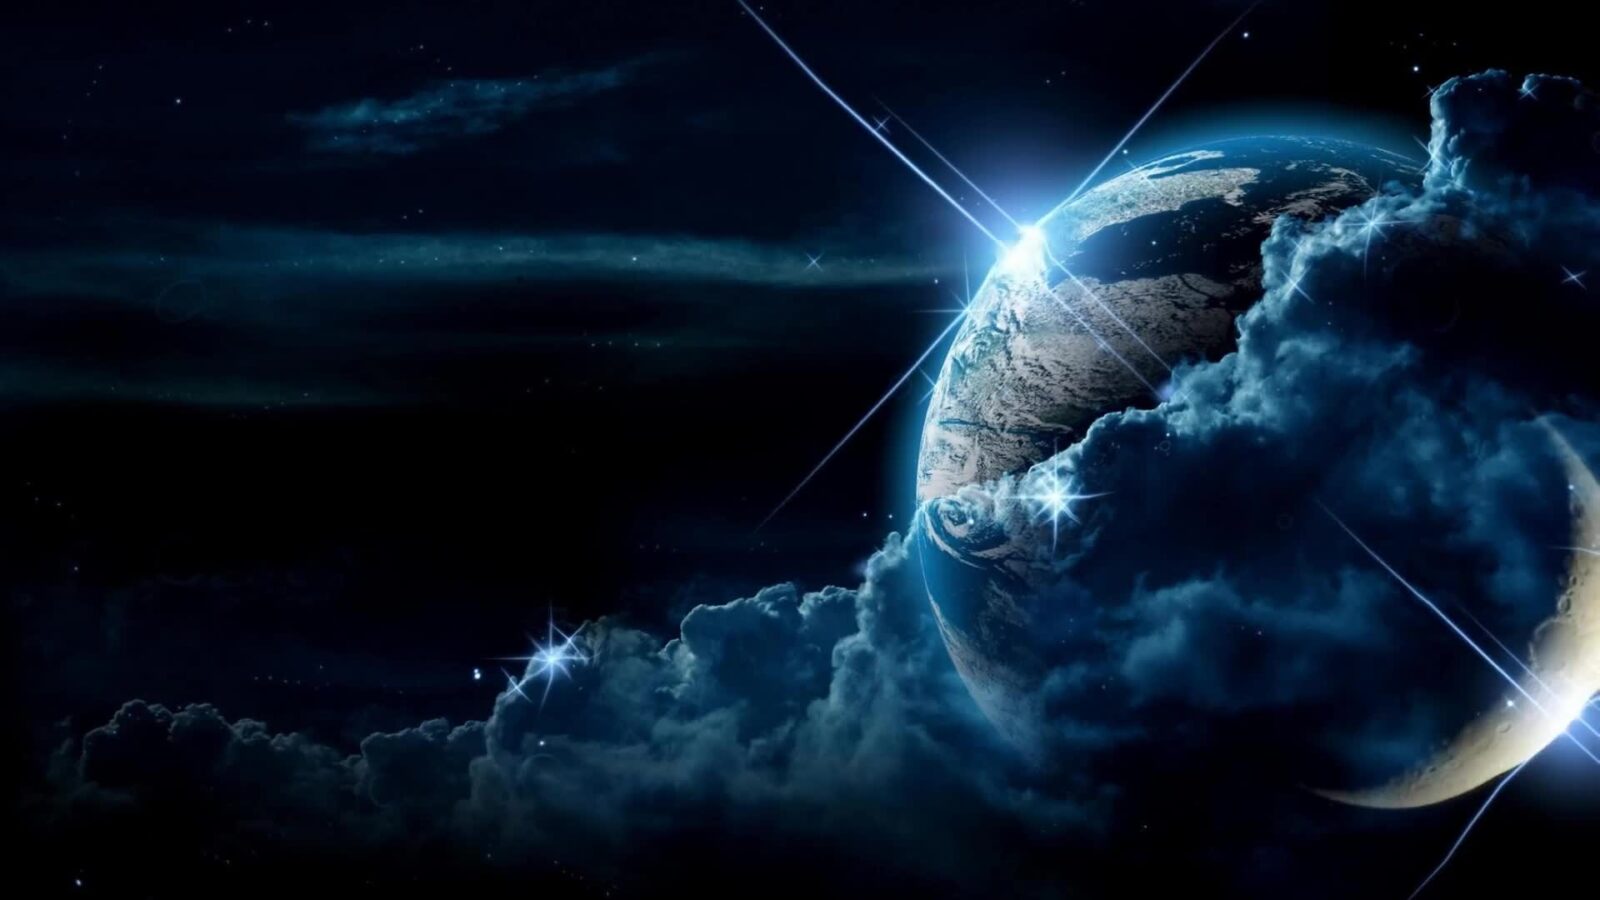 LiveWallpapers4Free.com | Earth And Moon Fantasy Artwork - Free Live Wallpaper